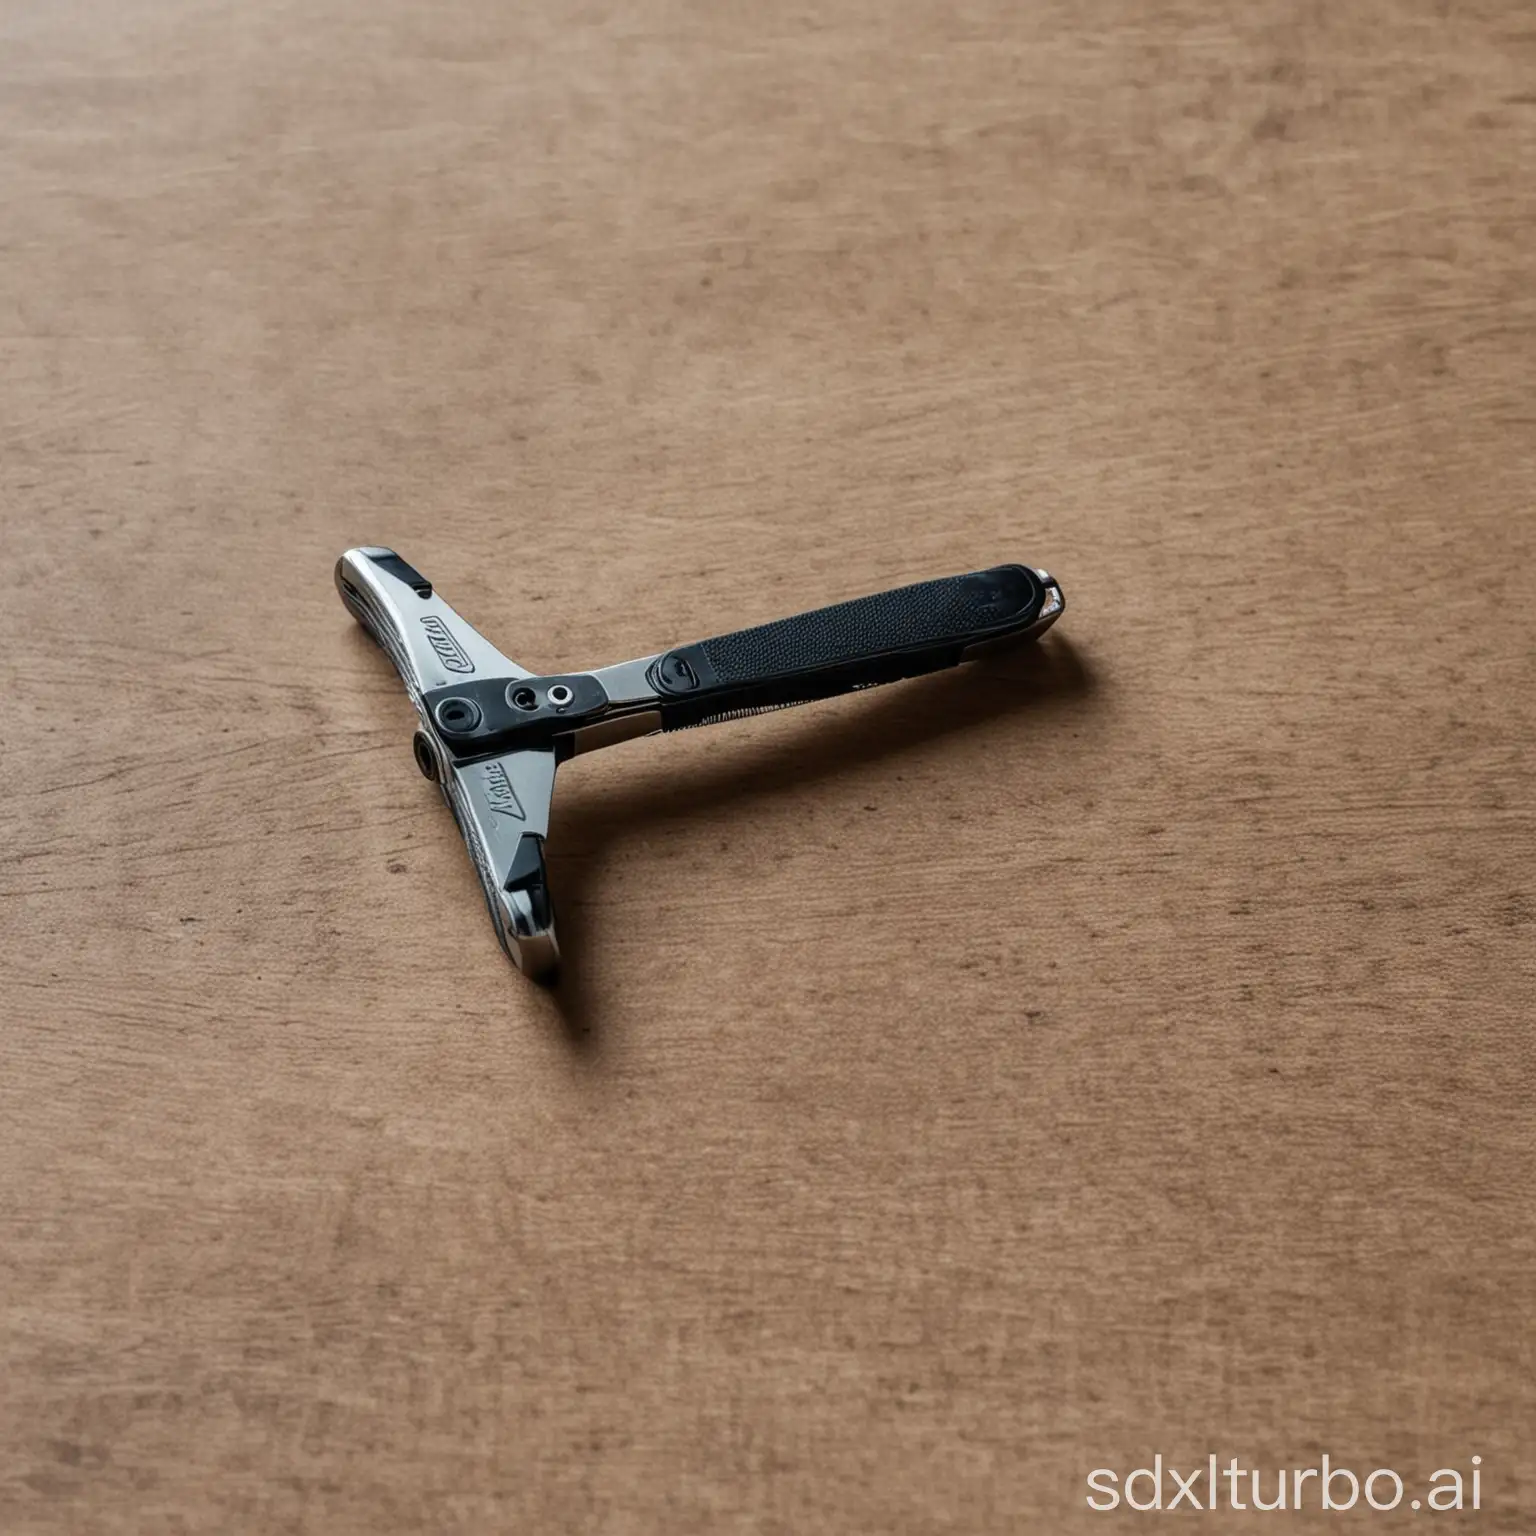 Sharp-Razor-Placed-on-Wooden-Table